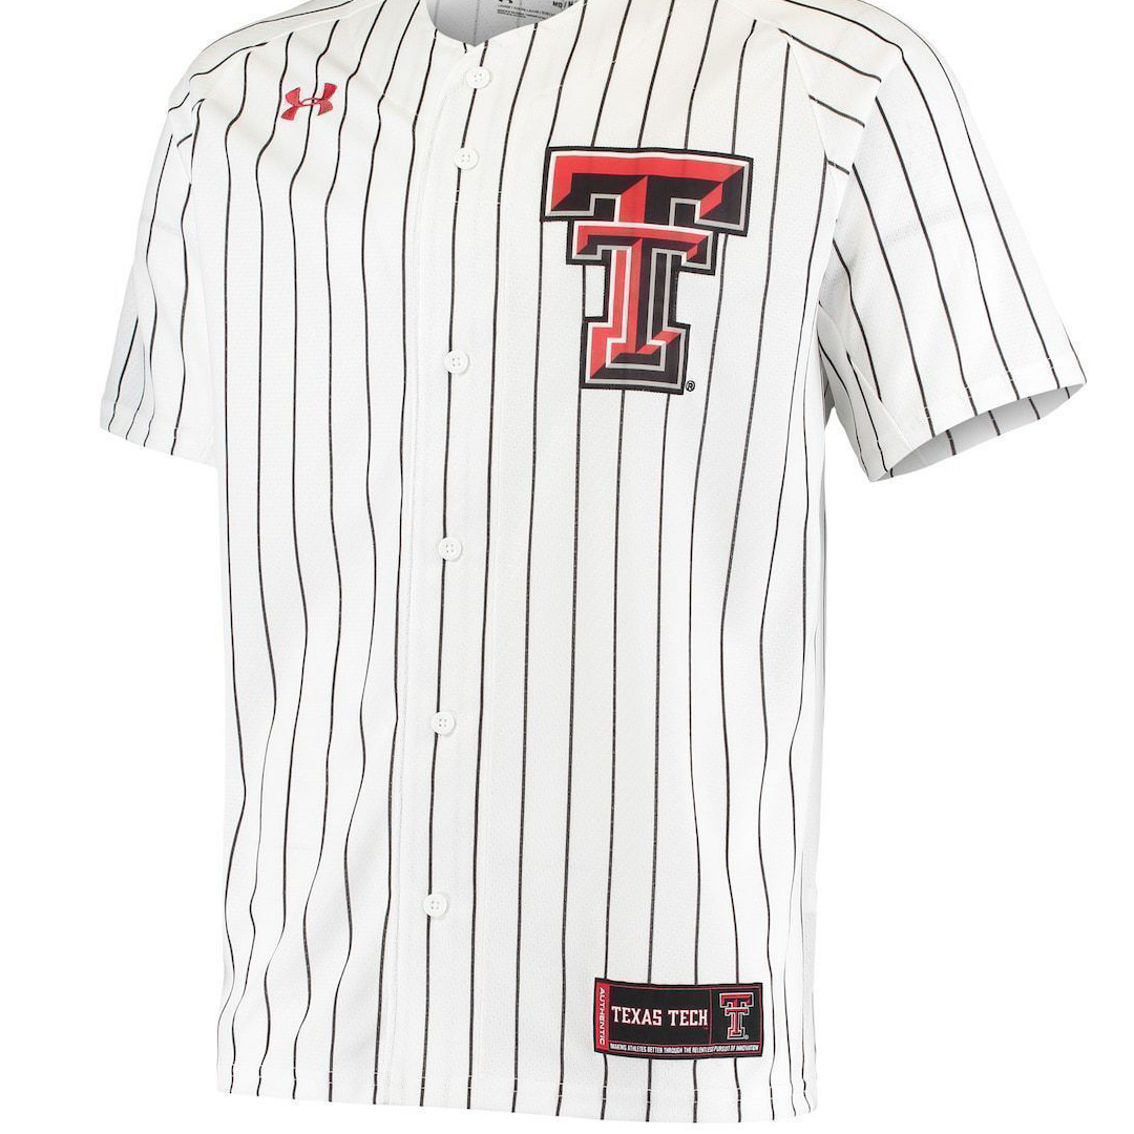 Under Armour Men's White Texas Tech Red Raiders Replica Performance Baseball Jersey - Image 3 of 4